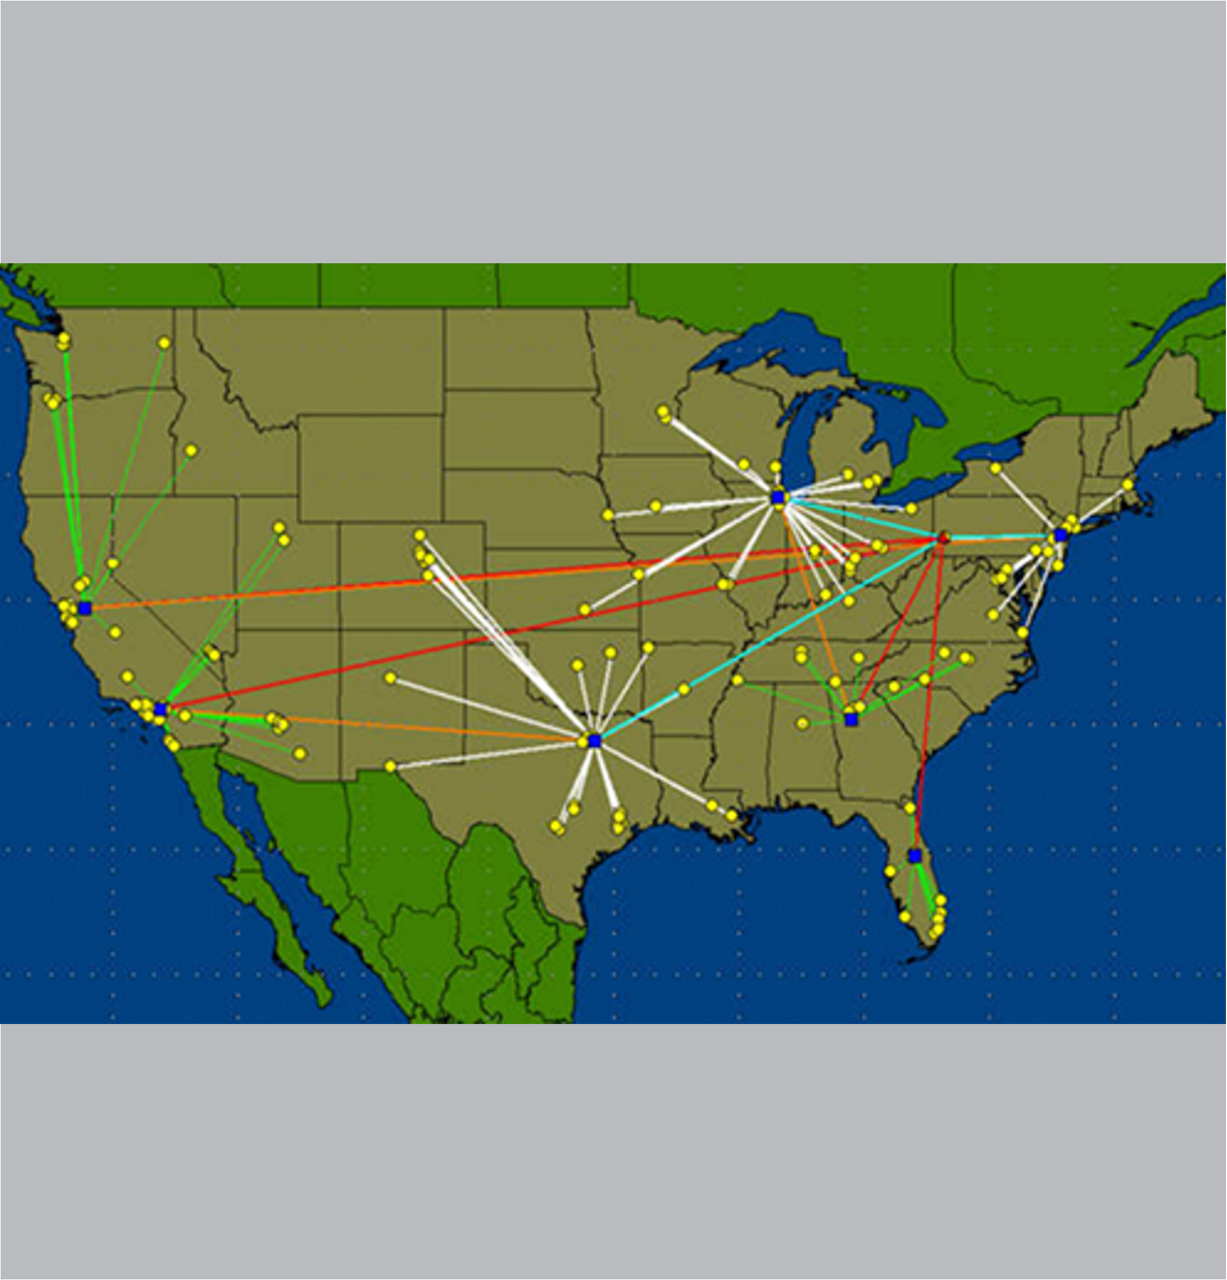 Square United States Map shows the various locations where Chain Link Services has warehouses or third-party logistics partners